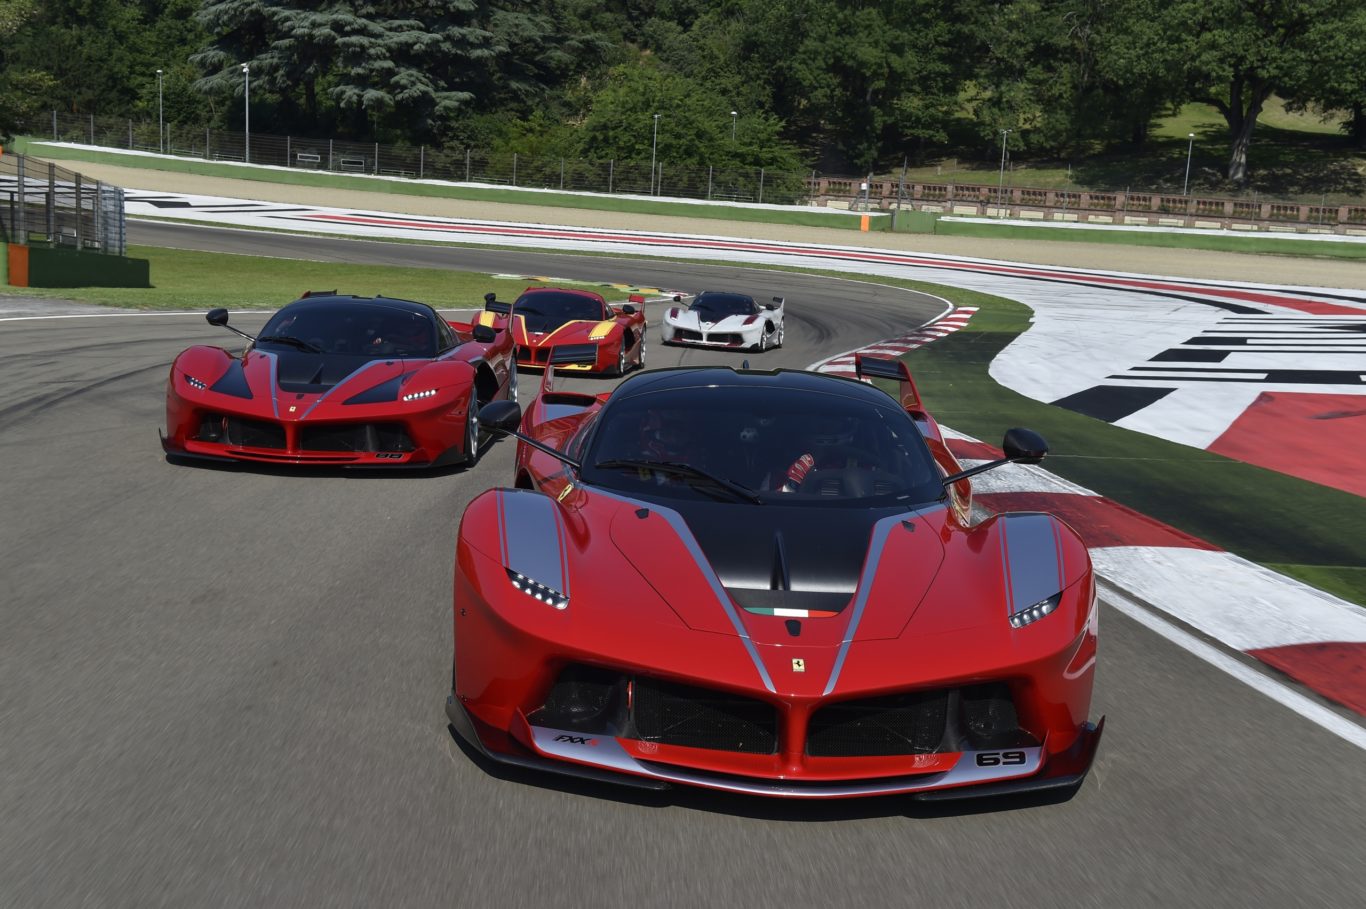 Part of the globe-trotting Corse Clienti tour, Ferrari’s XX Programme is the opportunity for the super-rich owners of the FXX, 599 XX and FXXK to take to numerous world-class Formula One-level circuits